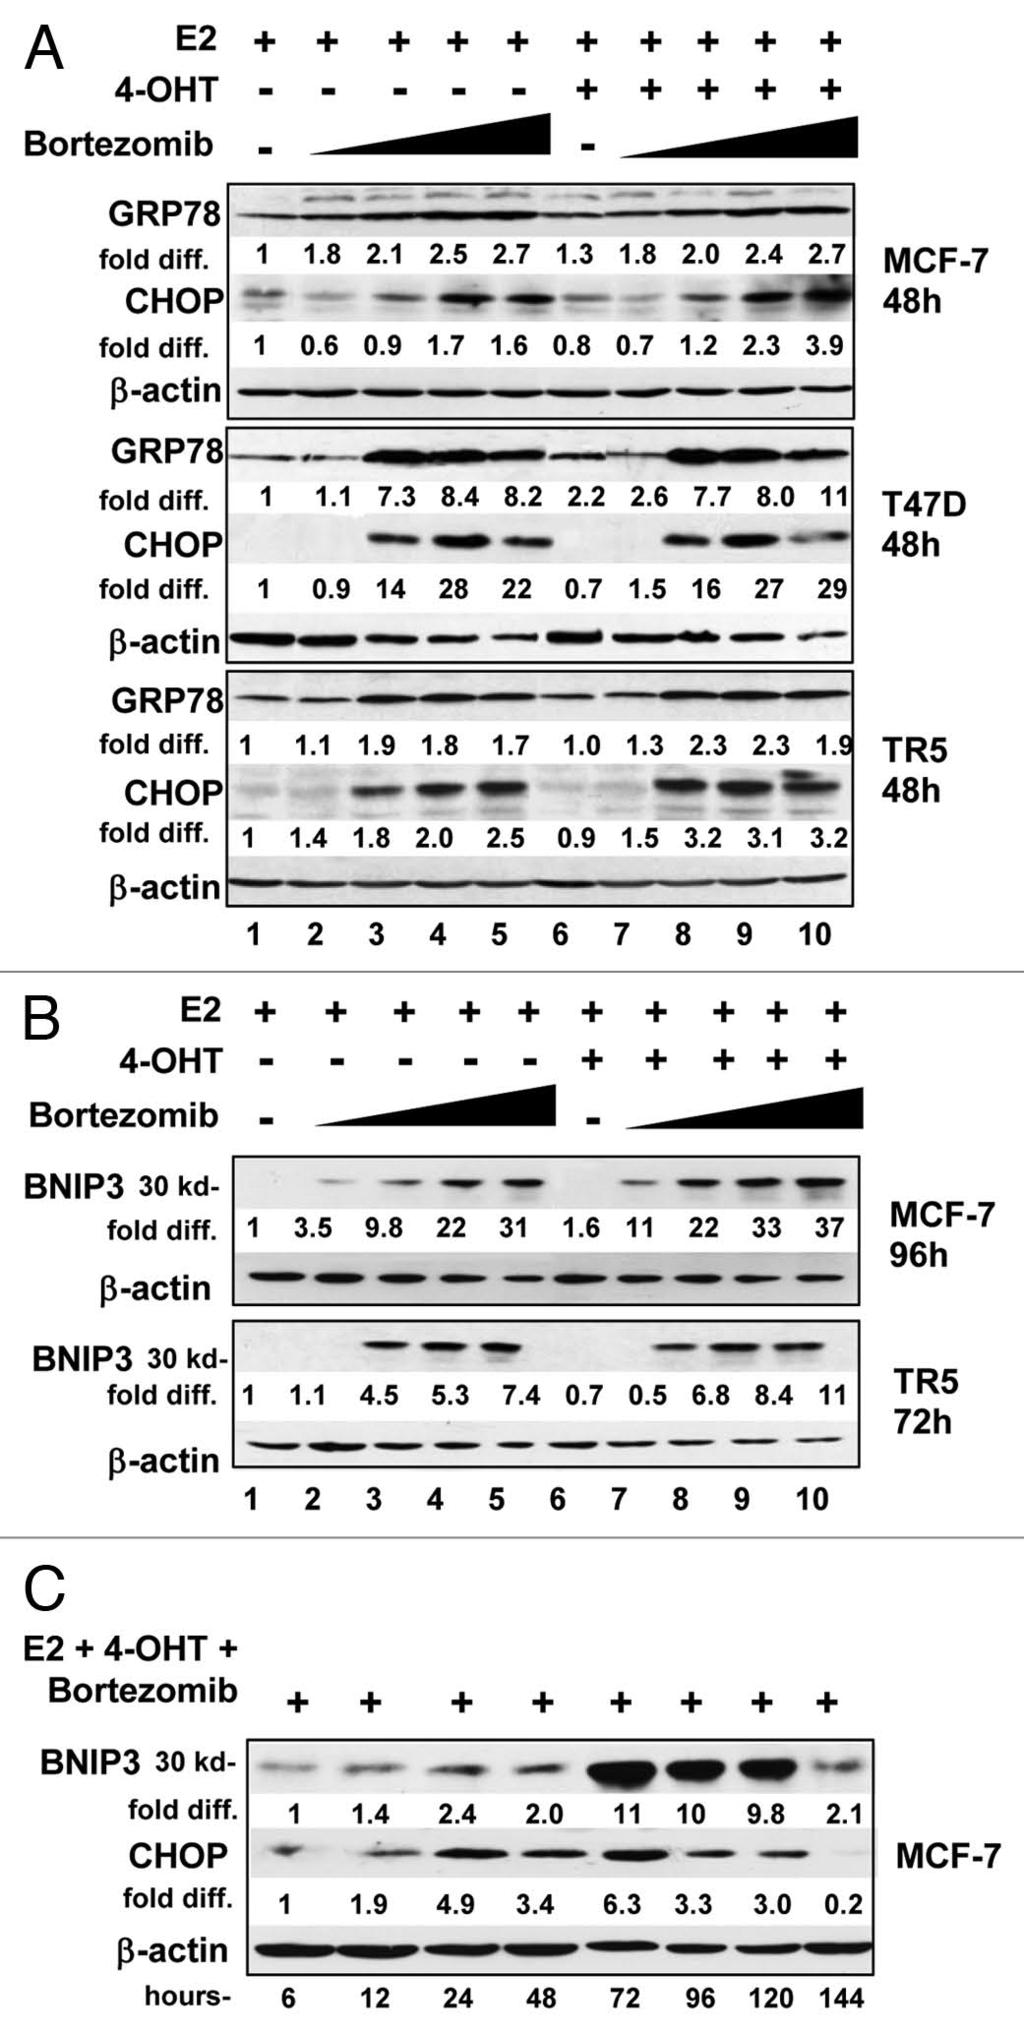 Figure 7. Bortezomib induced ER stress in ER + breast cancer cells and BNIP3 expression.